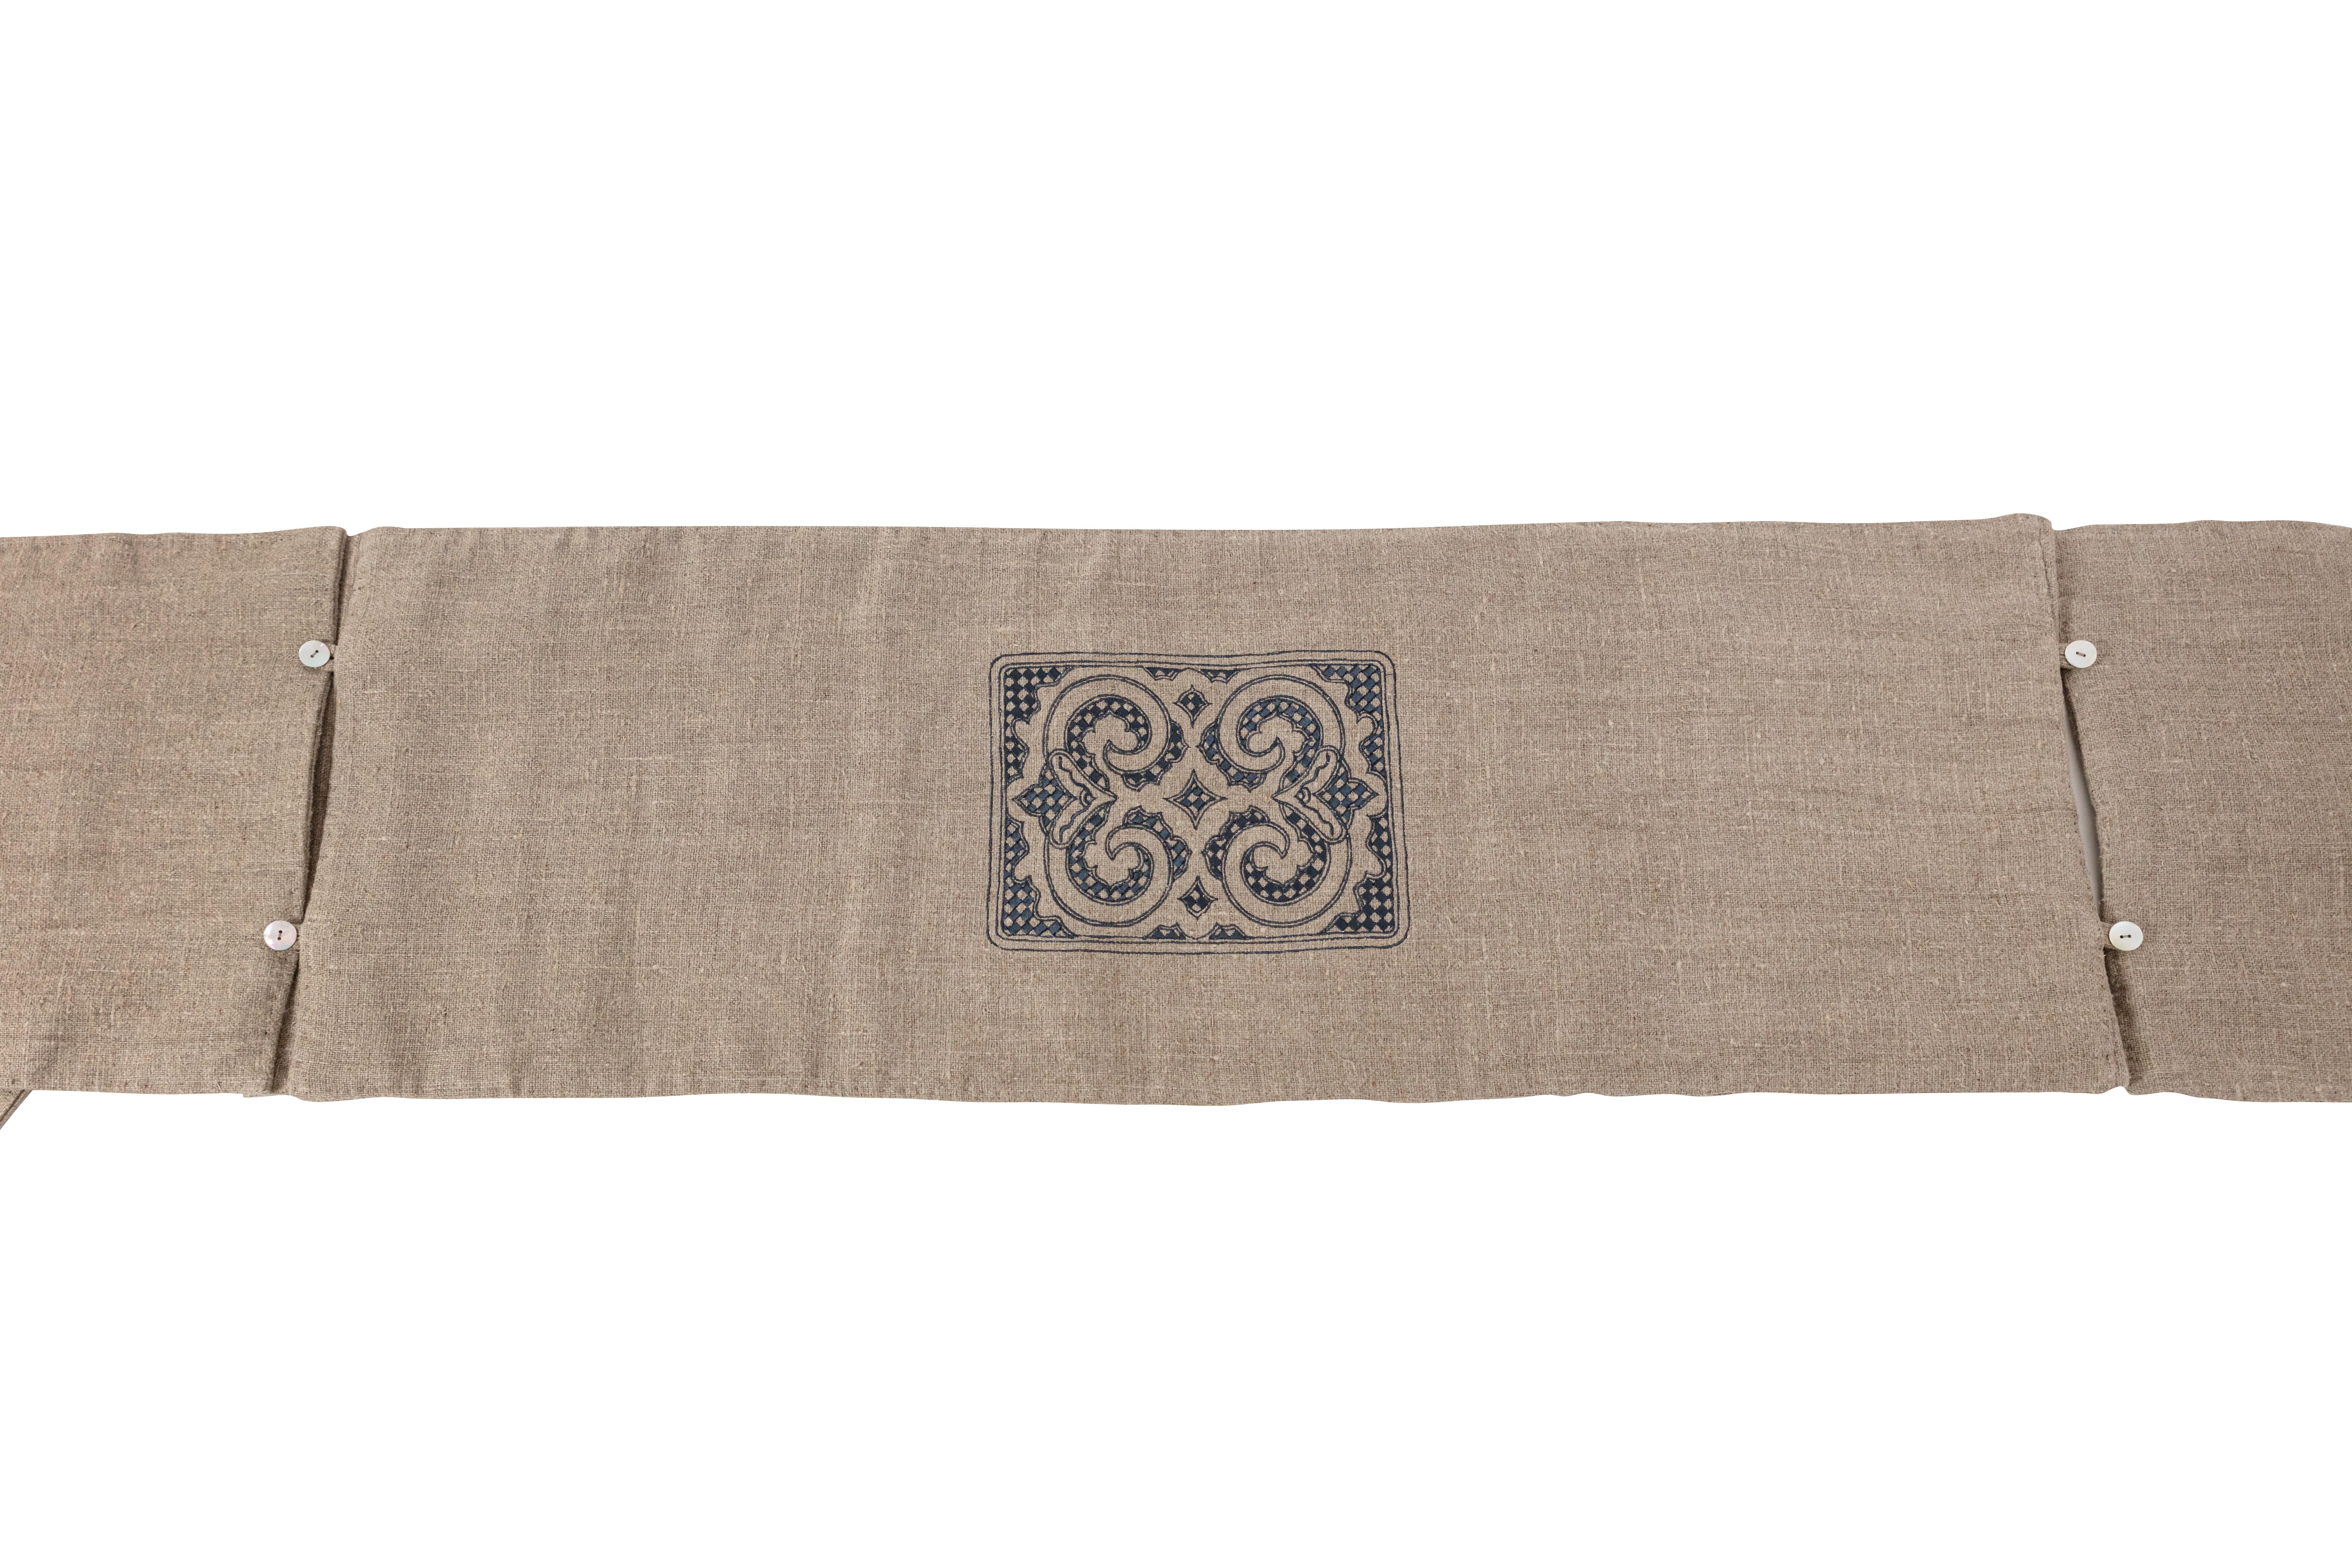 This hand-embroidered linen table runner from SoShiro’s Ainu collection, a collaboration between award-winning artist Toru Kaizawa and Shiro Muchiri, consists of three separate pieces, so it can be buttoned up to form an extra-long runner for larger